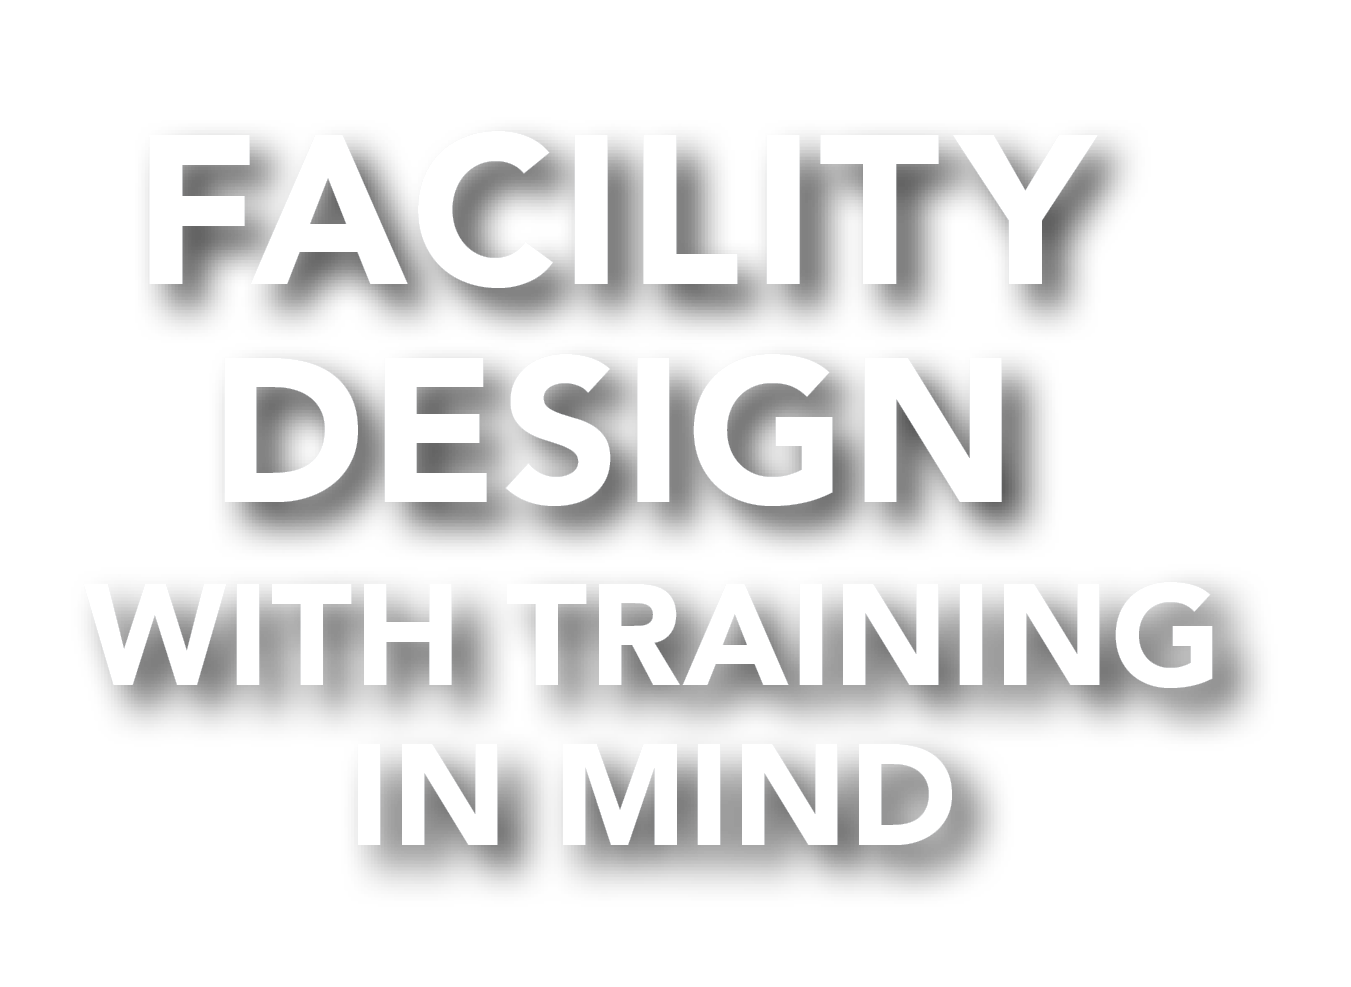 Facility Design With Training in Mind